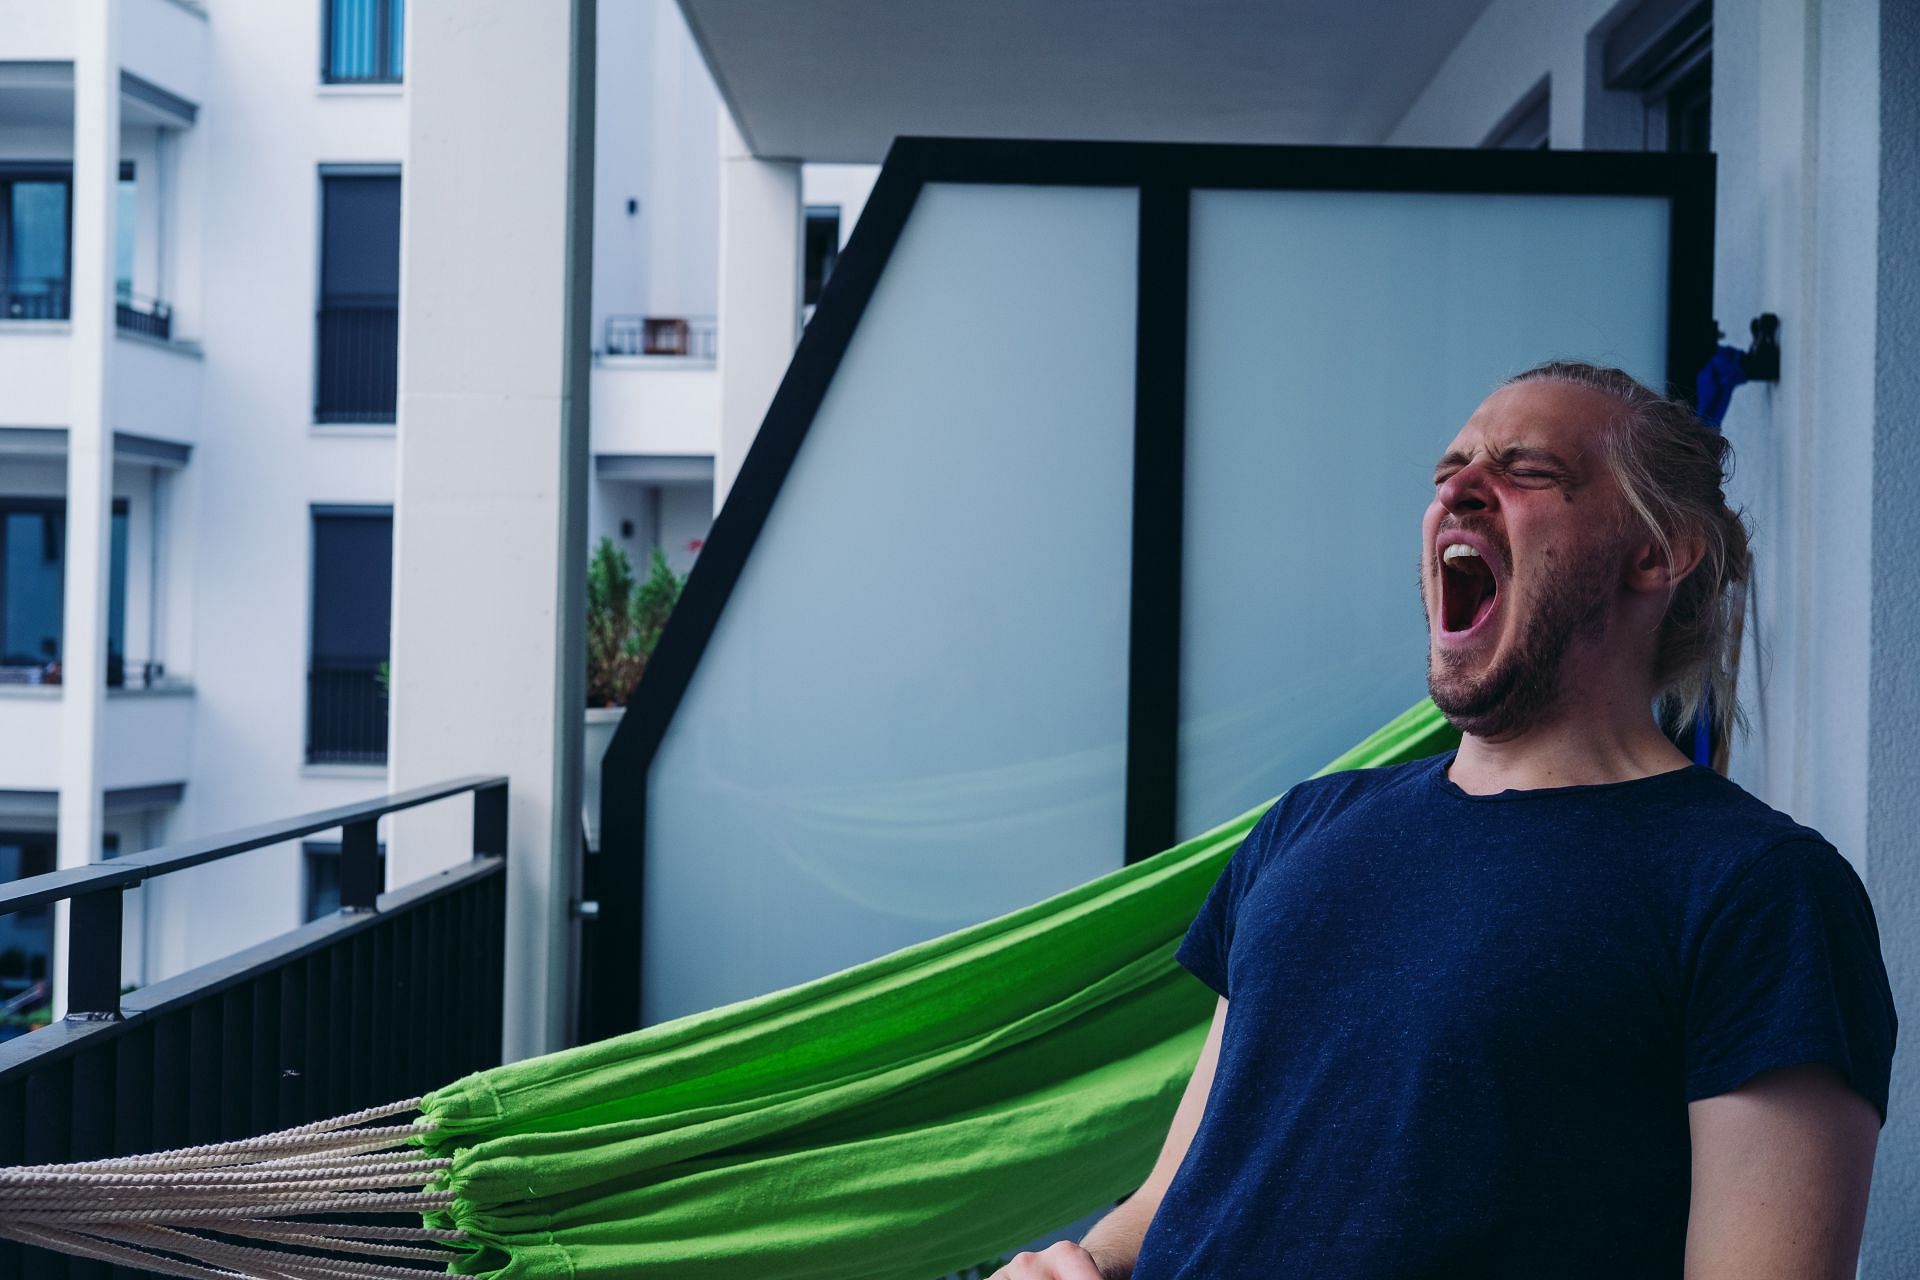 You may have a sleep problem if you are having frequent yawns. (Image via Unsplash/Miikka Luotio)